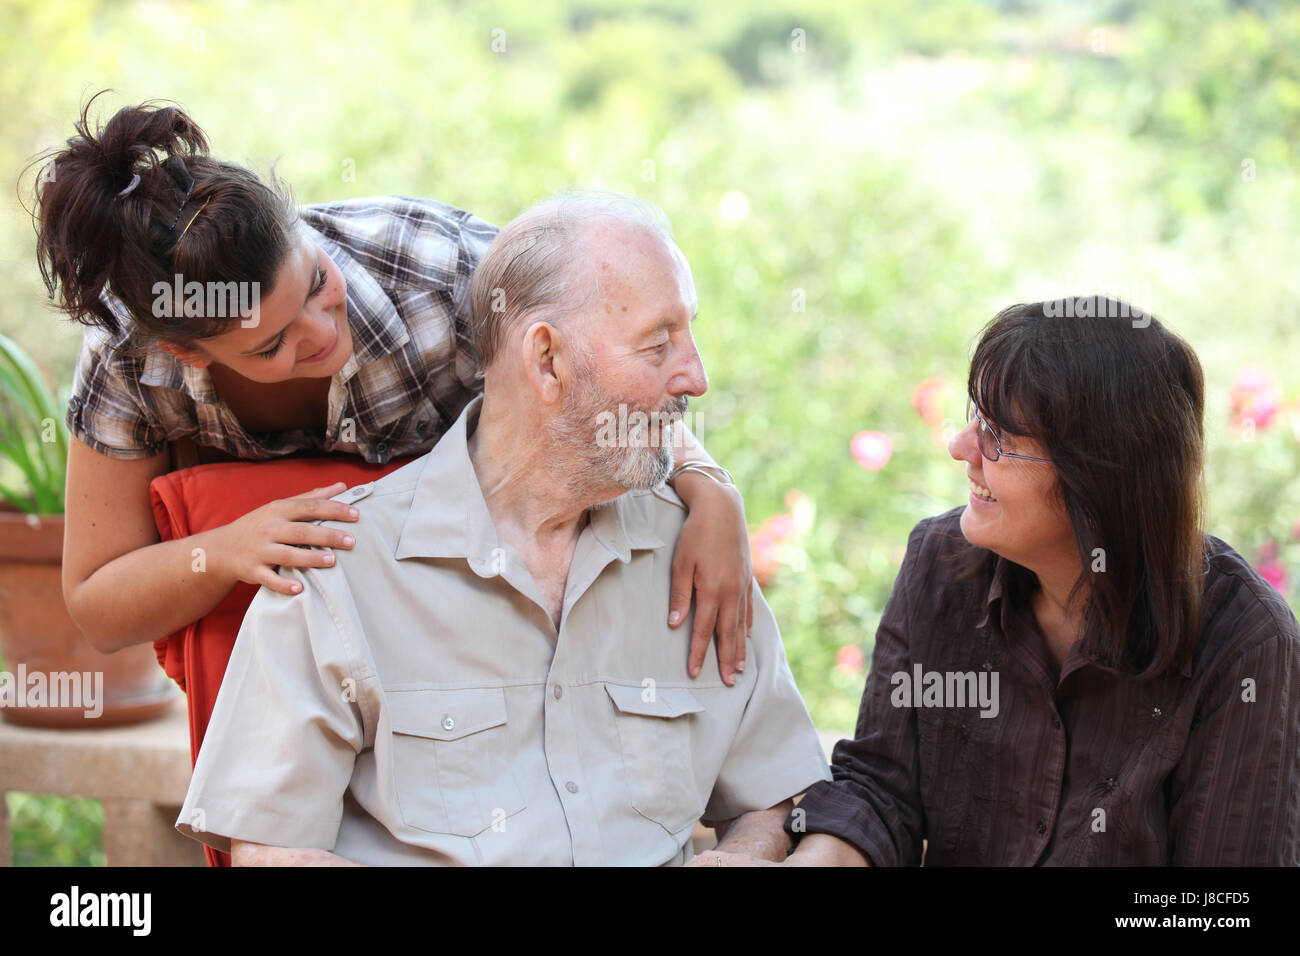 woman, laugh, laughs, laughing, twit, giggle, smile, smiling, laughter, Stock Photo